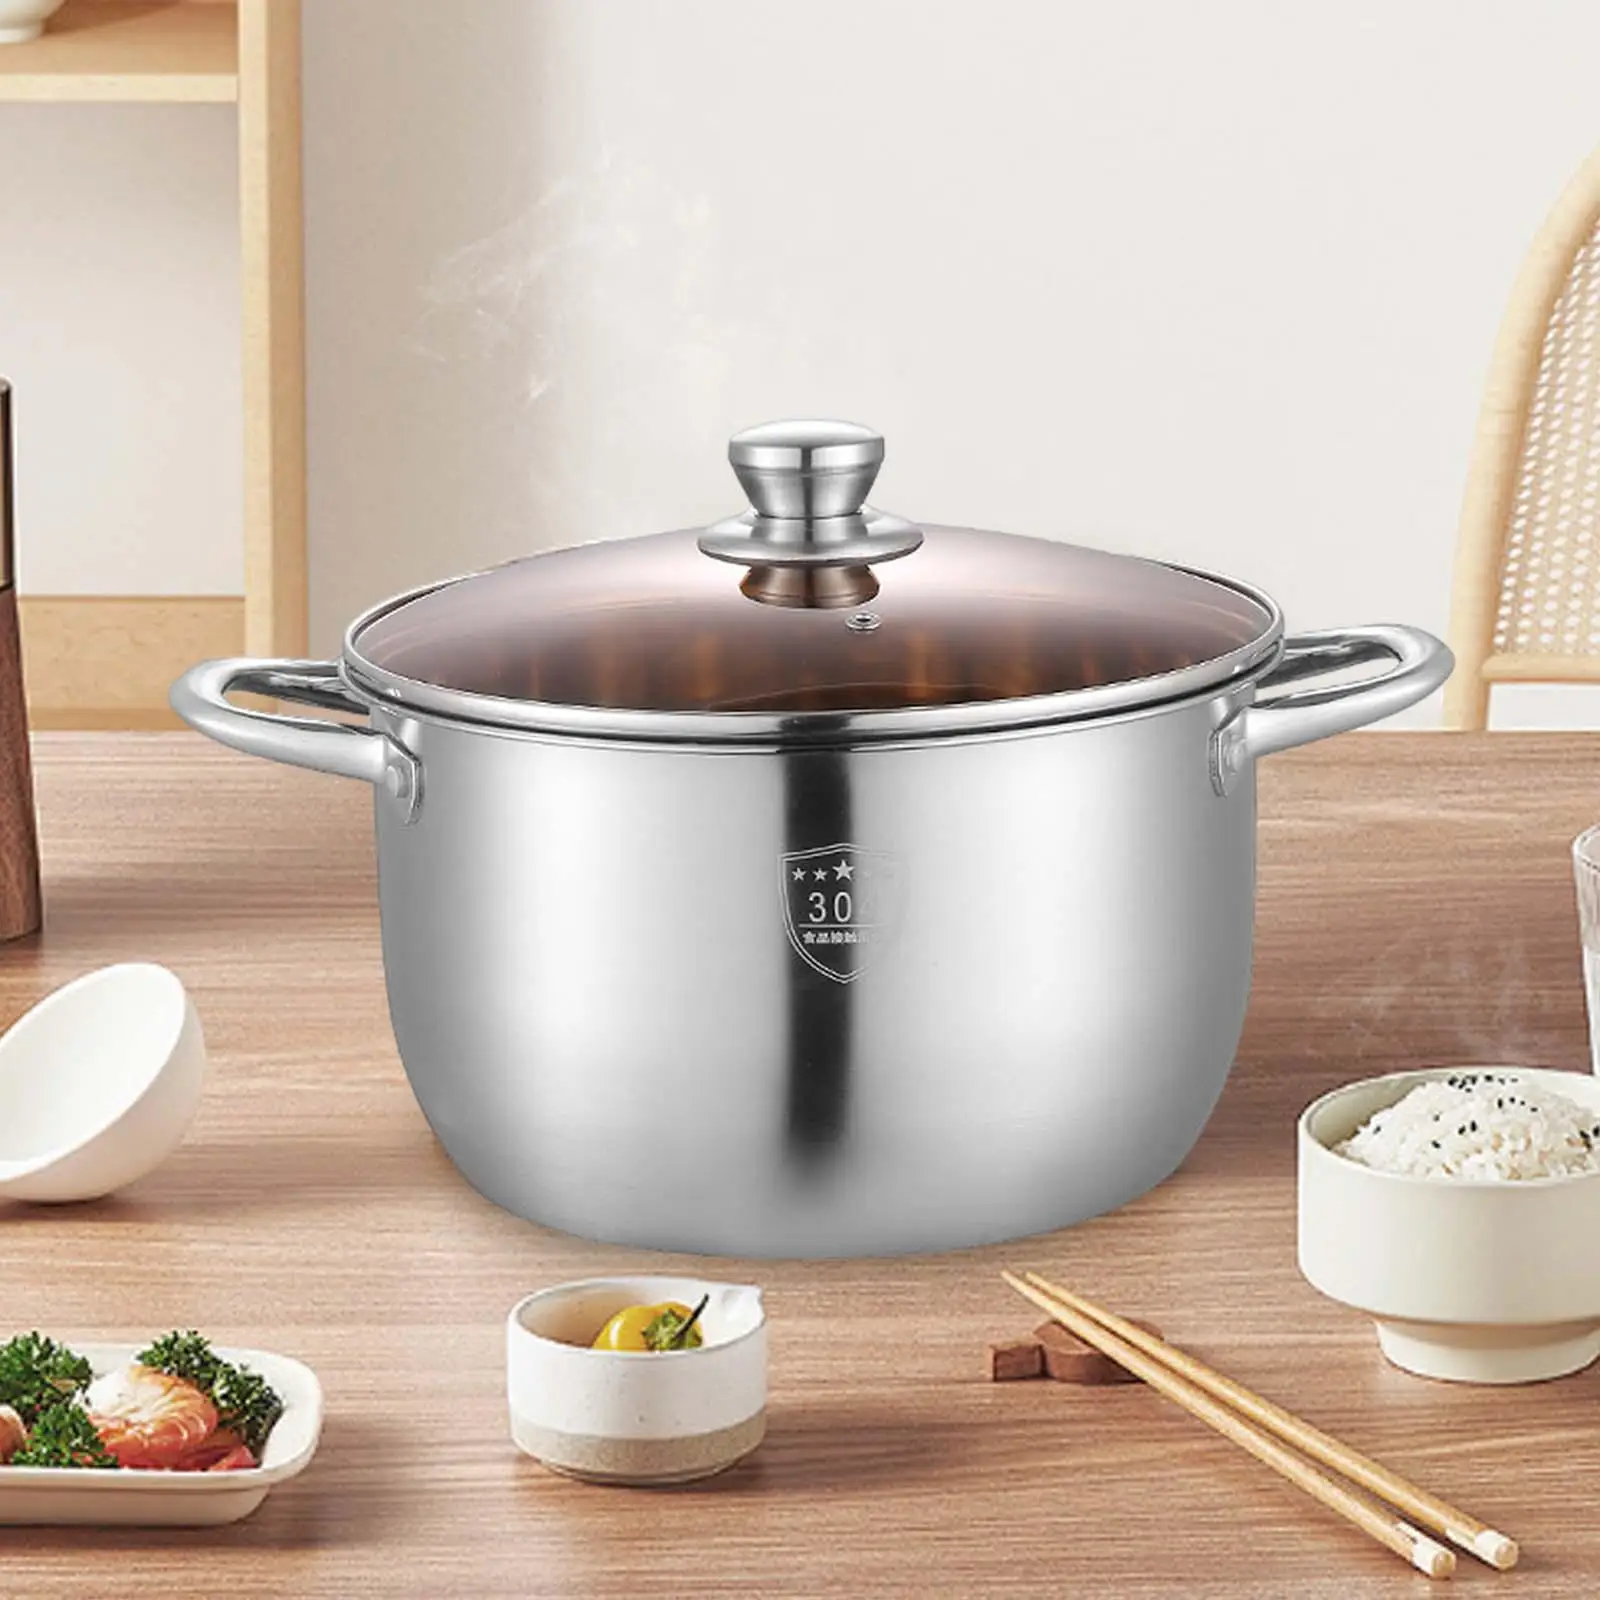 Stainless Steel Stockpot Thick Bottom Cookware Pasta Pot Dual Handle Small Saucepan for Sauce Soup Vegetables Meat Warming Milk